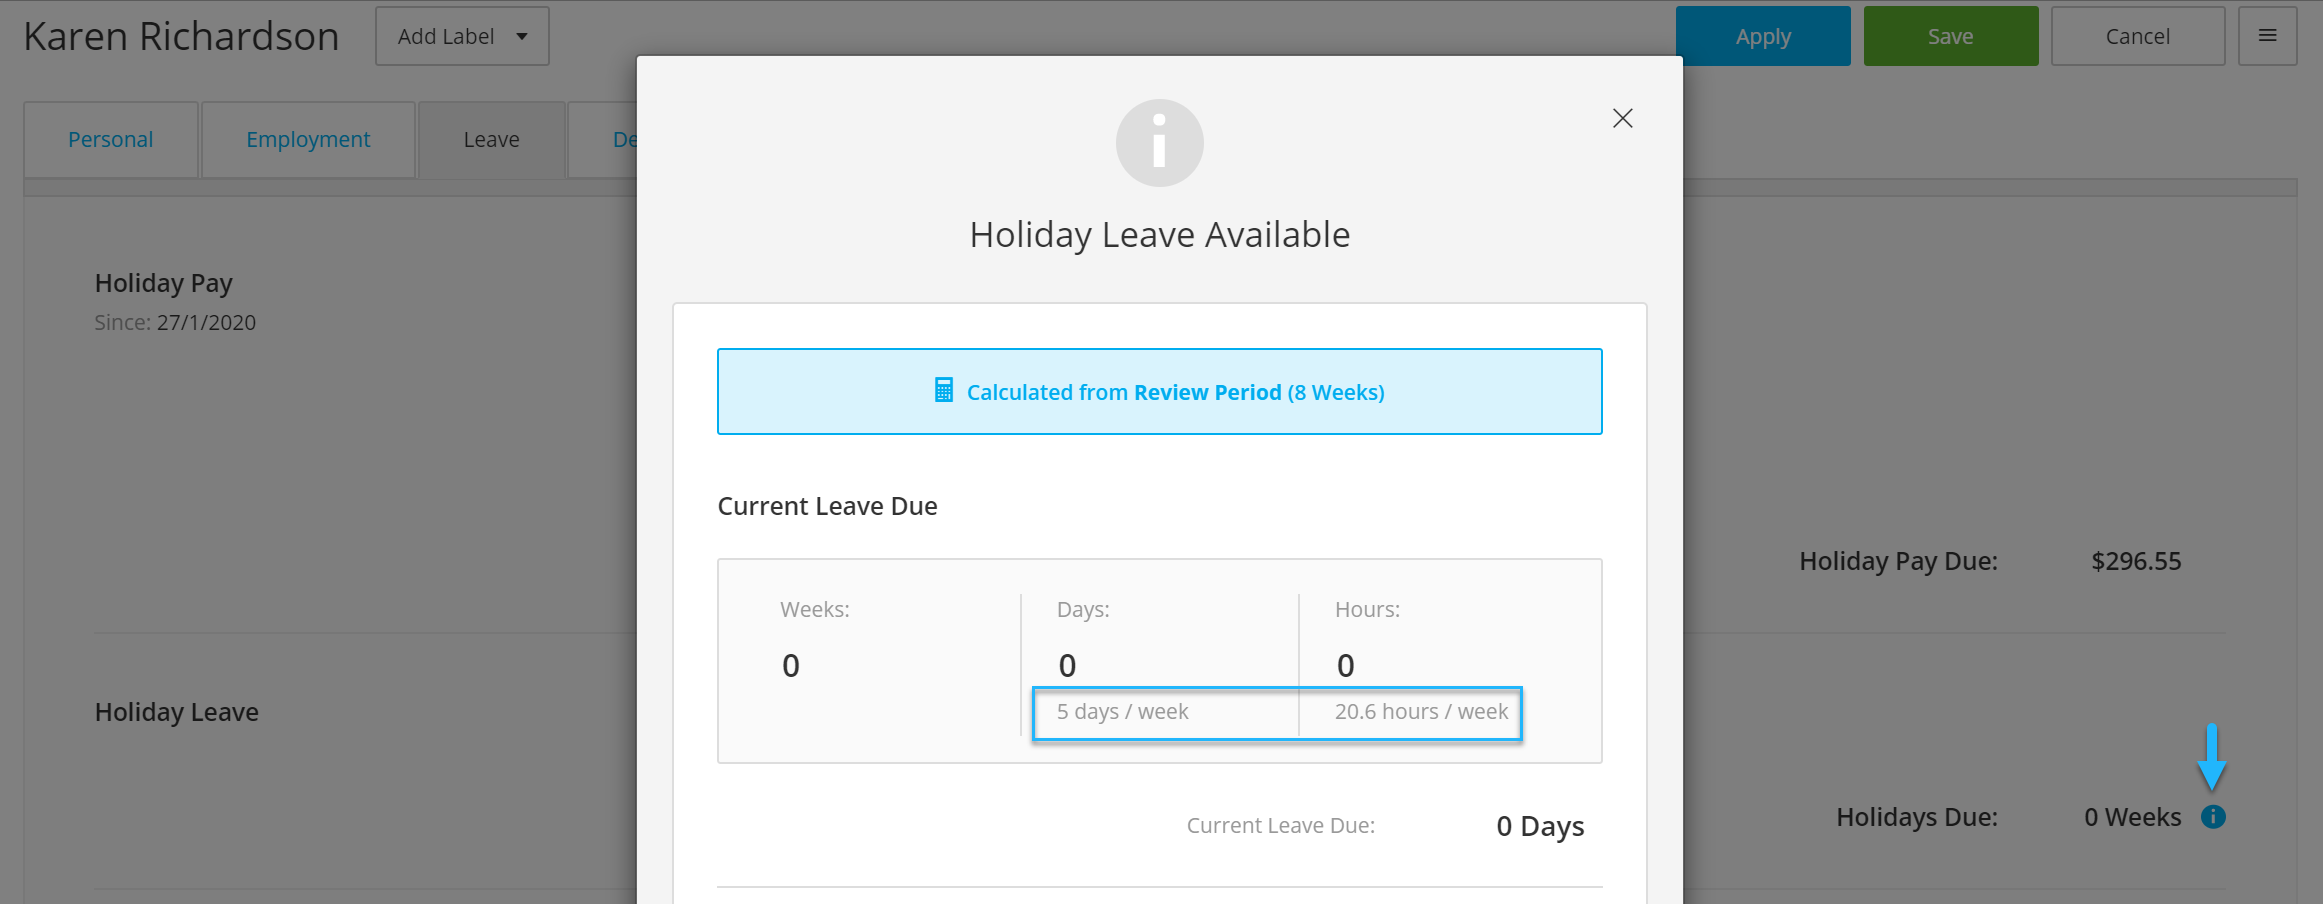 Holiday_Leave_Information.png